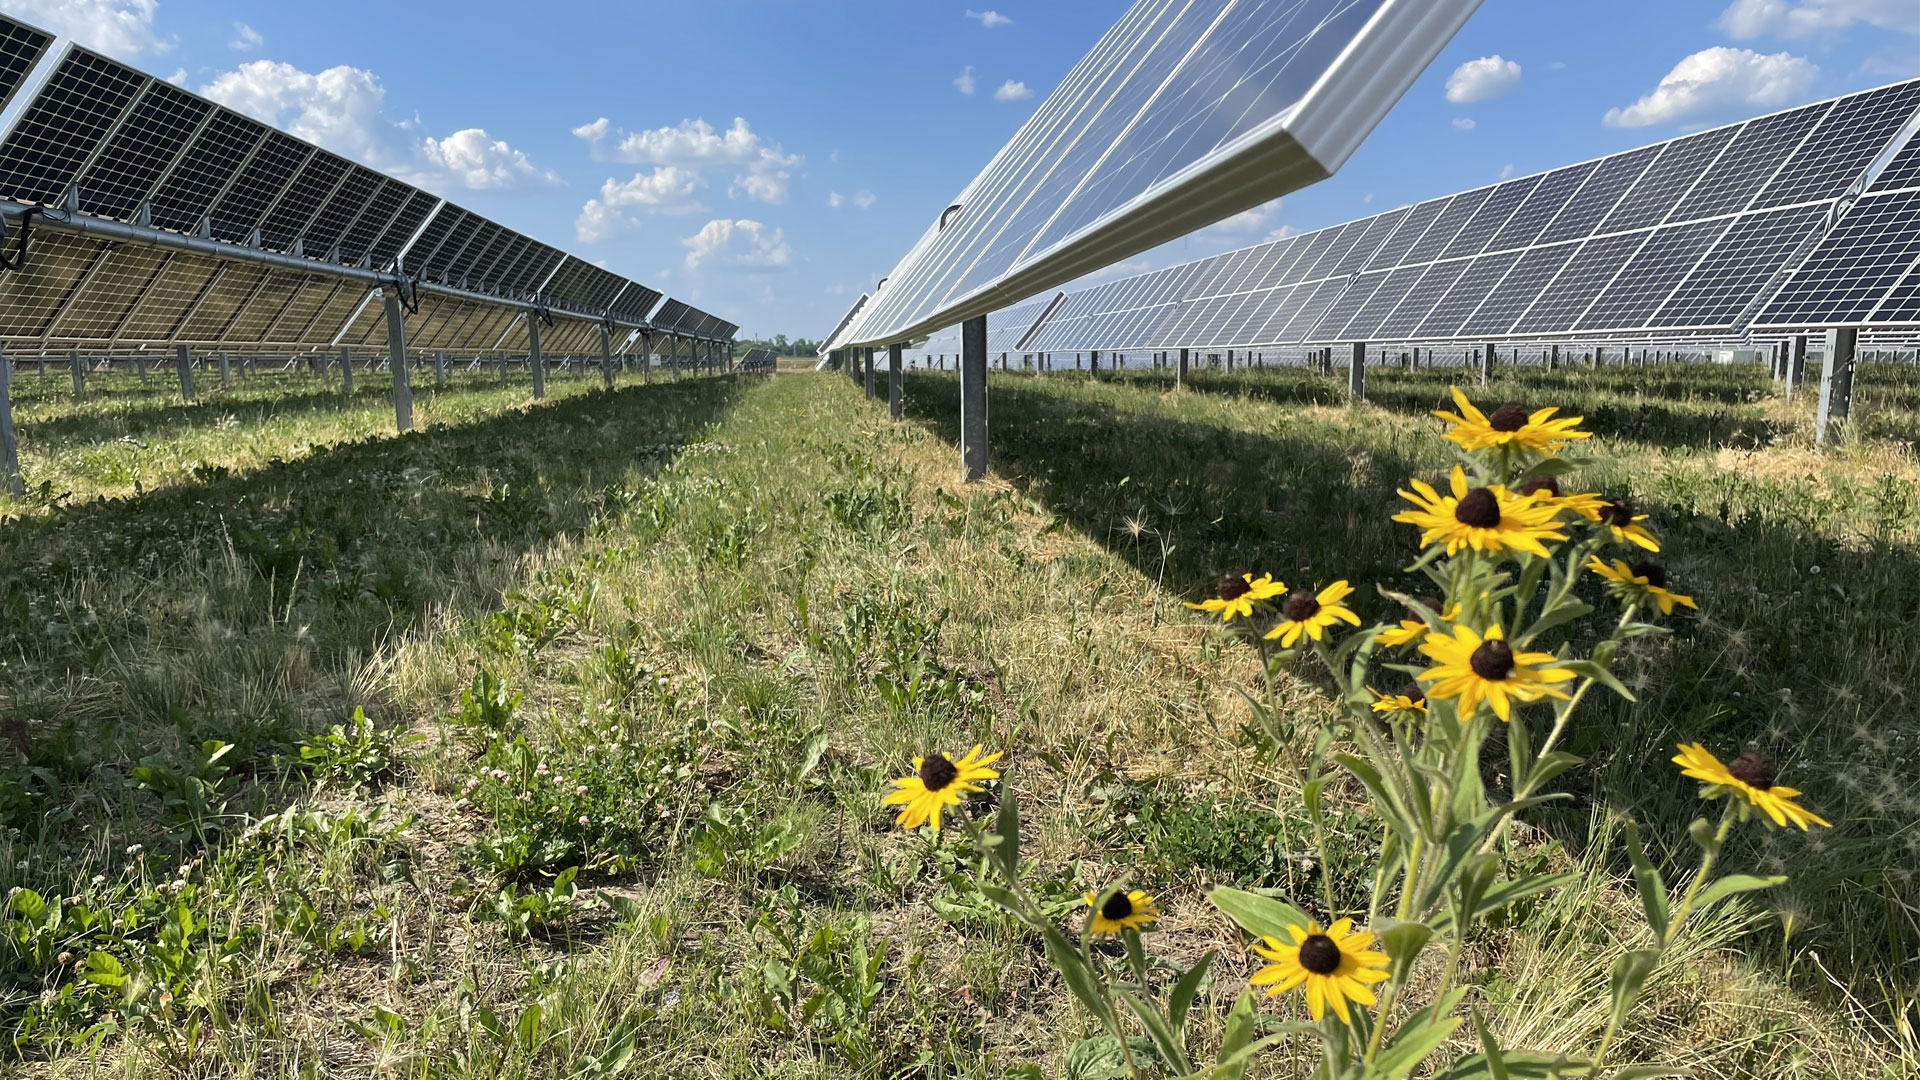 Eco-Friendly Energy: The Future of Solar with Sol Systems and American Farmland Trust (AFT)